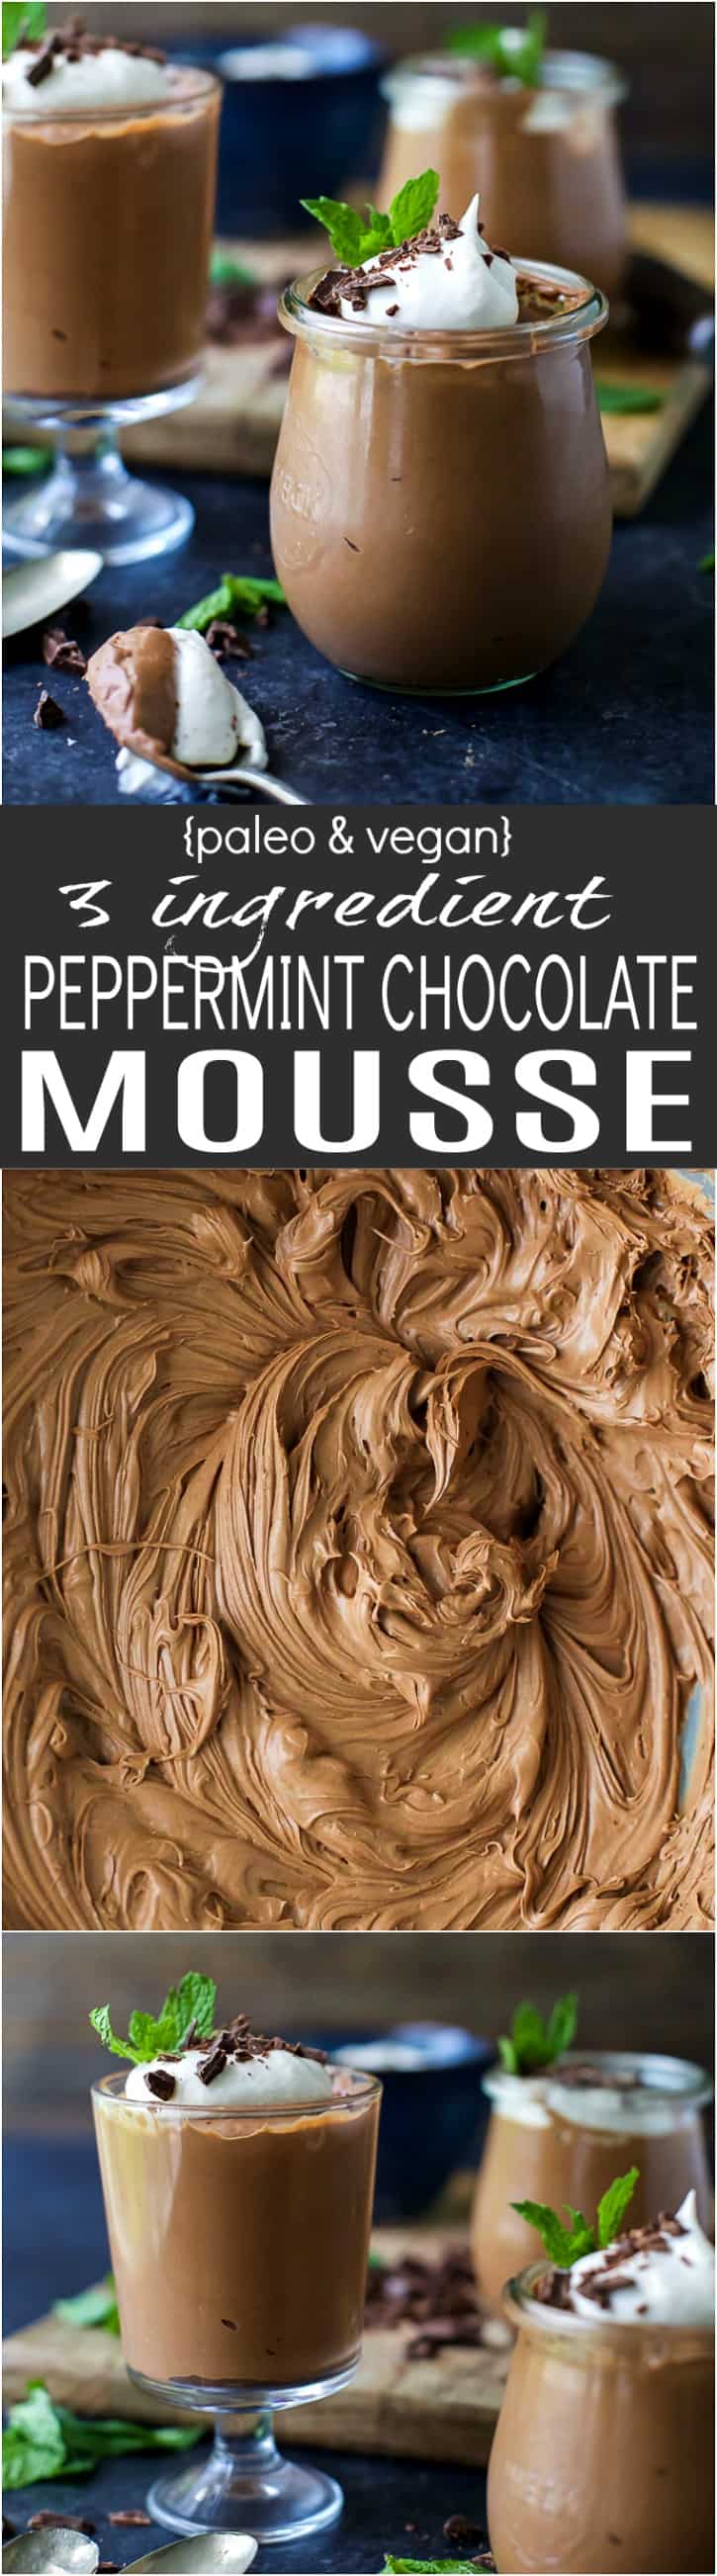 Easy Paleo & Vegan 3 Ingredient Peppermint Chocolate Mousse - creamy, luscious, and decadent. This Chocolate Mousse is absolutely perfect for the holidays!